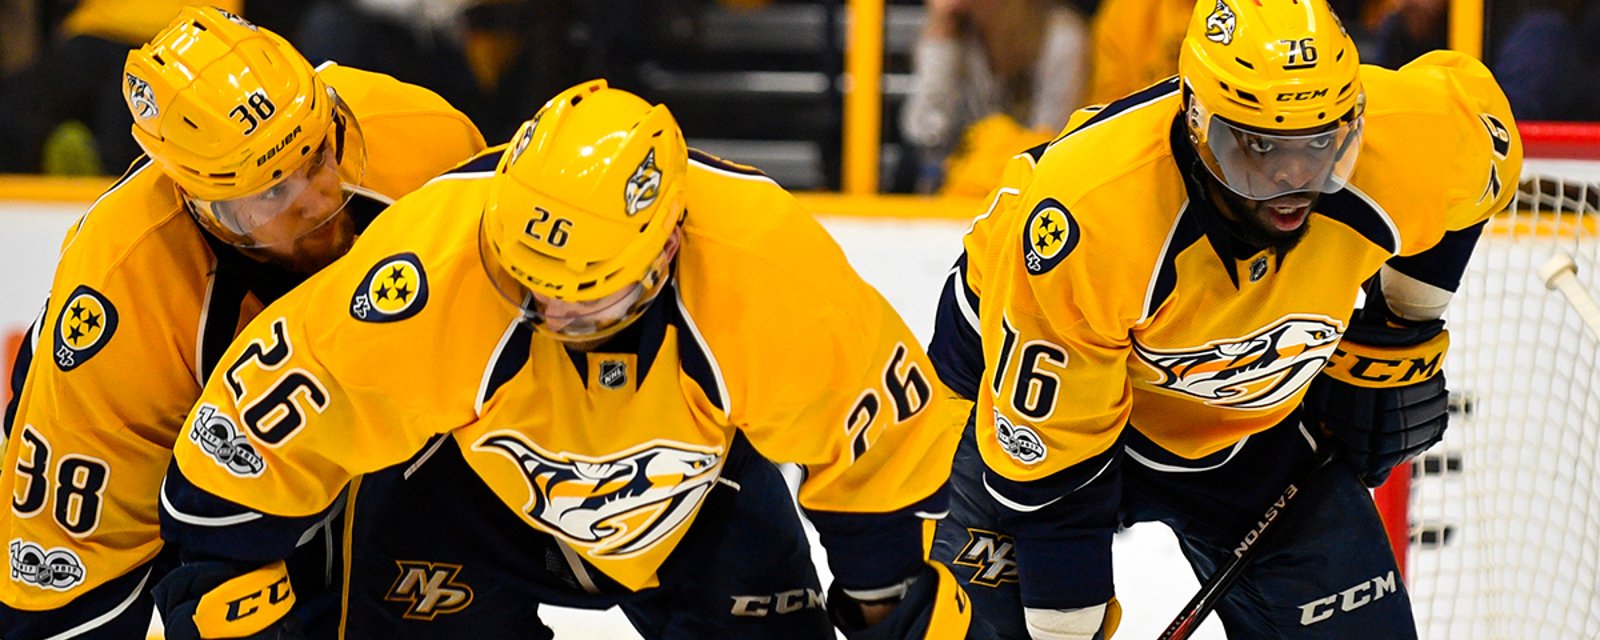 Teammates Fiala and Arvidsson go at it in practice, Subban forced to separate them